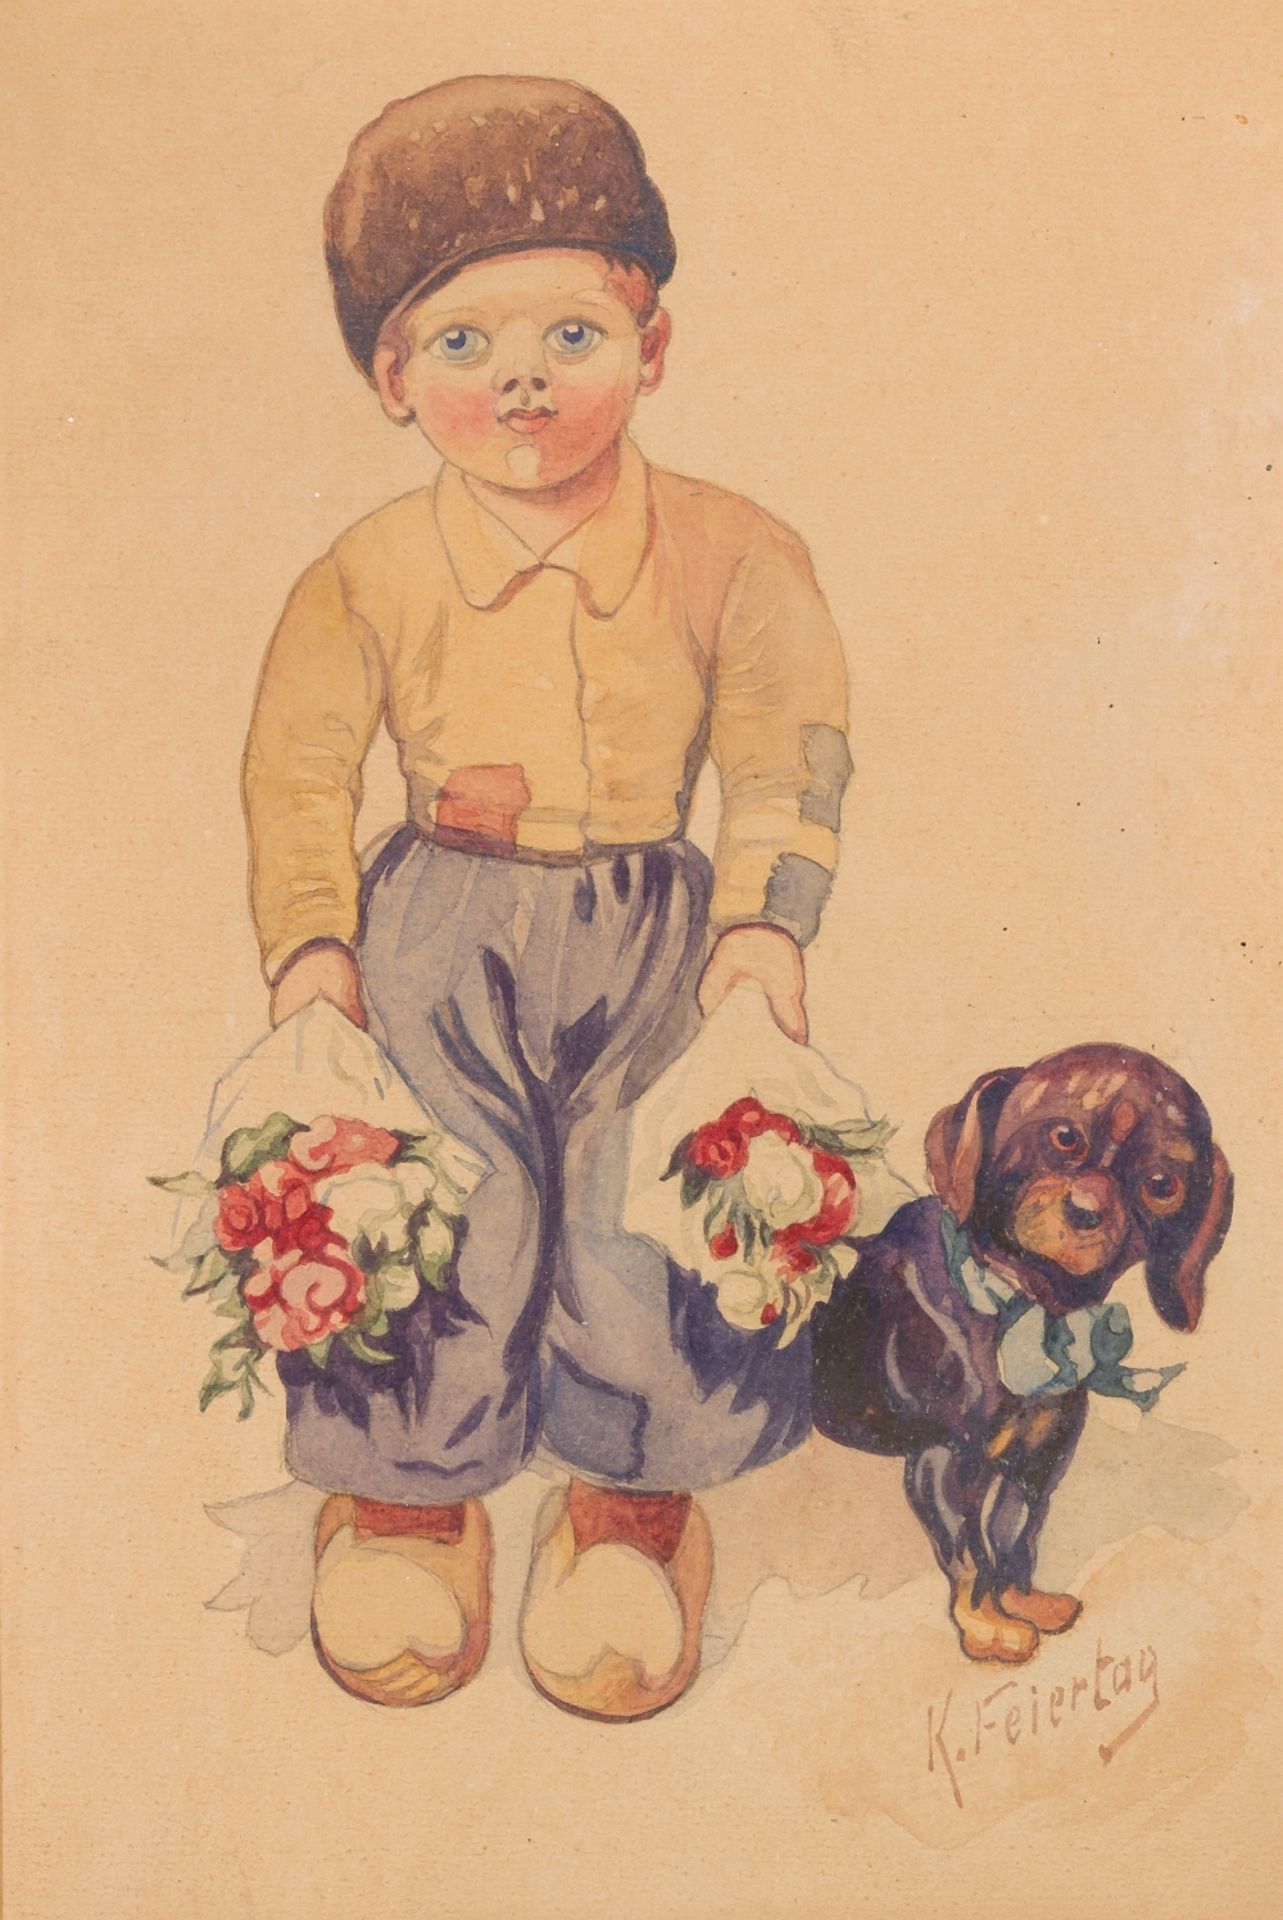 Feiertag, Karl(1874 - 1944)Postcard Design with Boy and DogWatercolor on PaperSigned lower